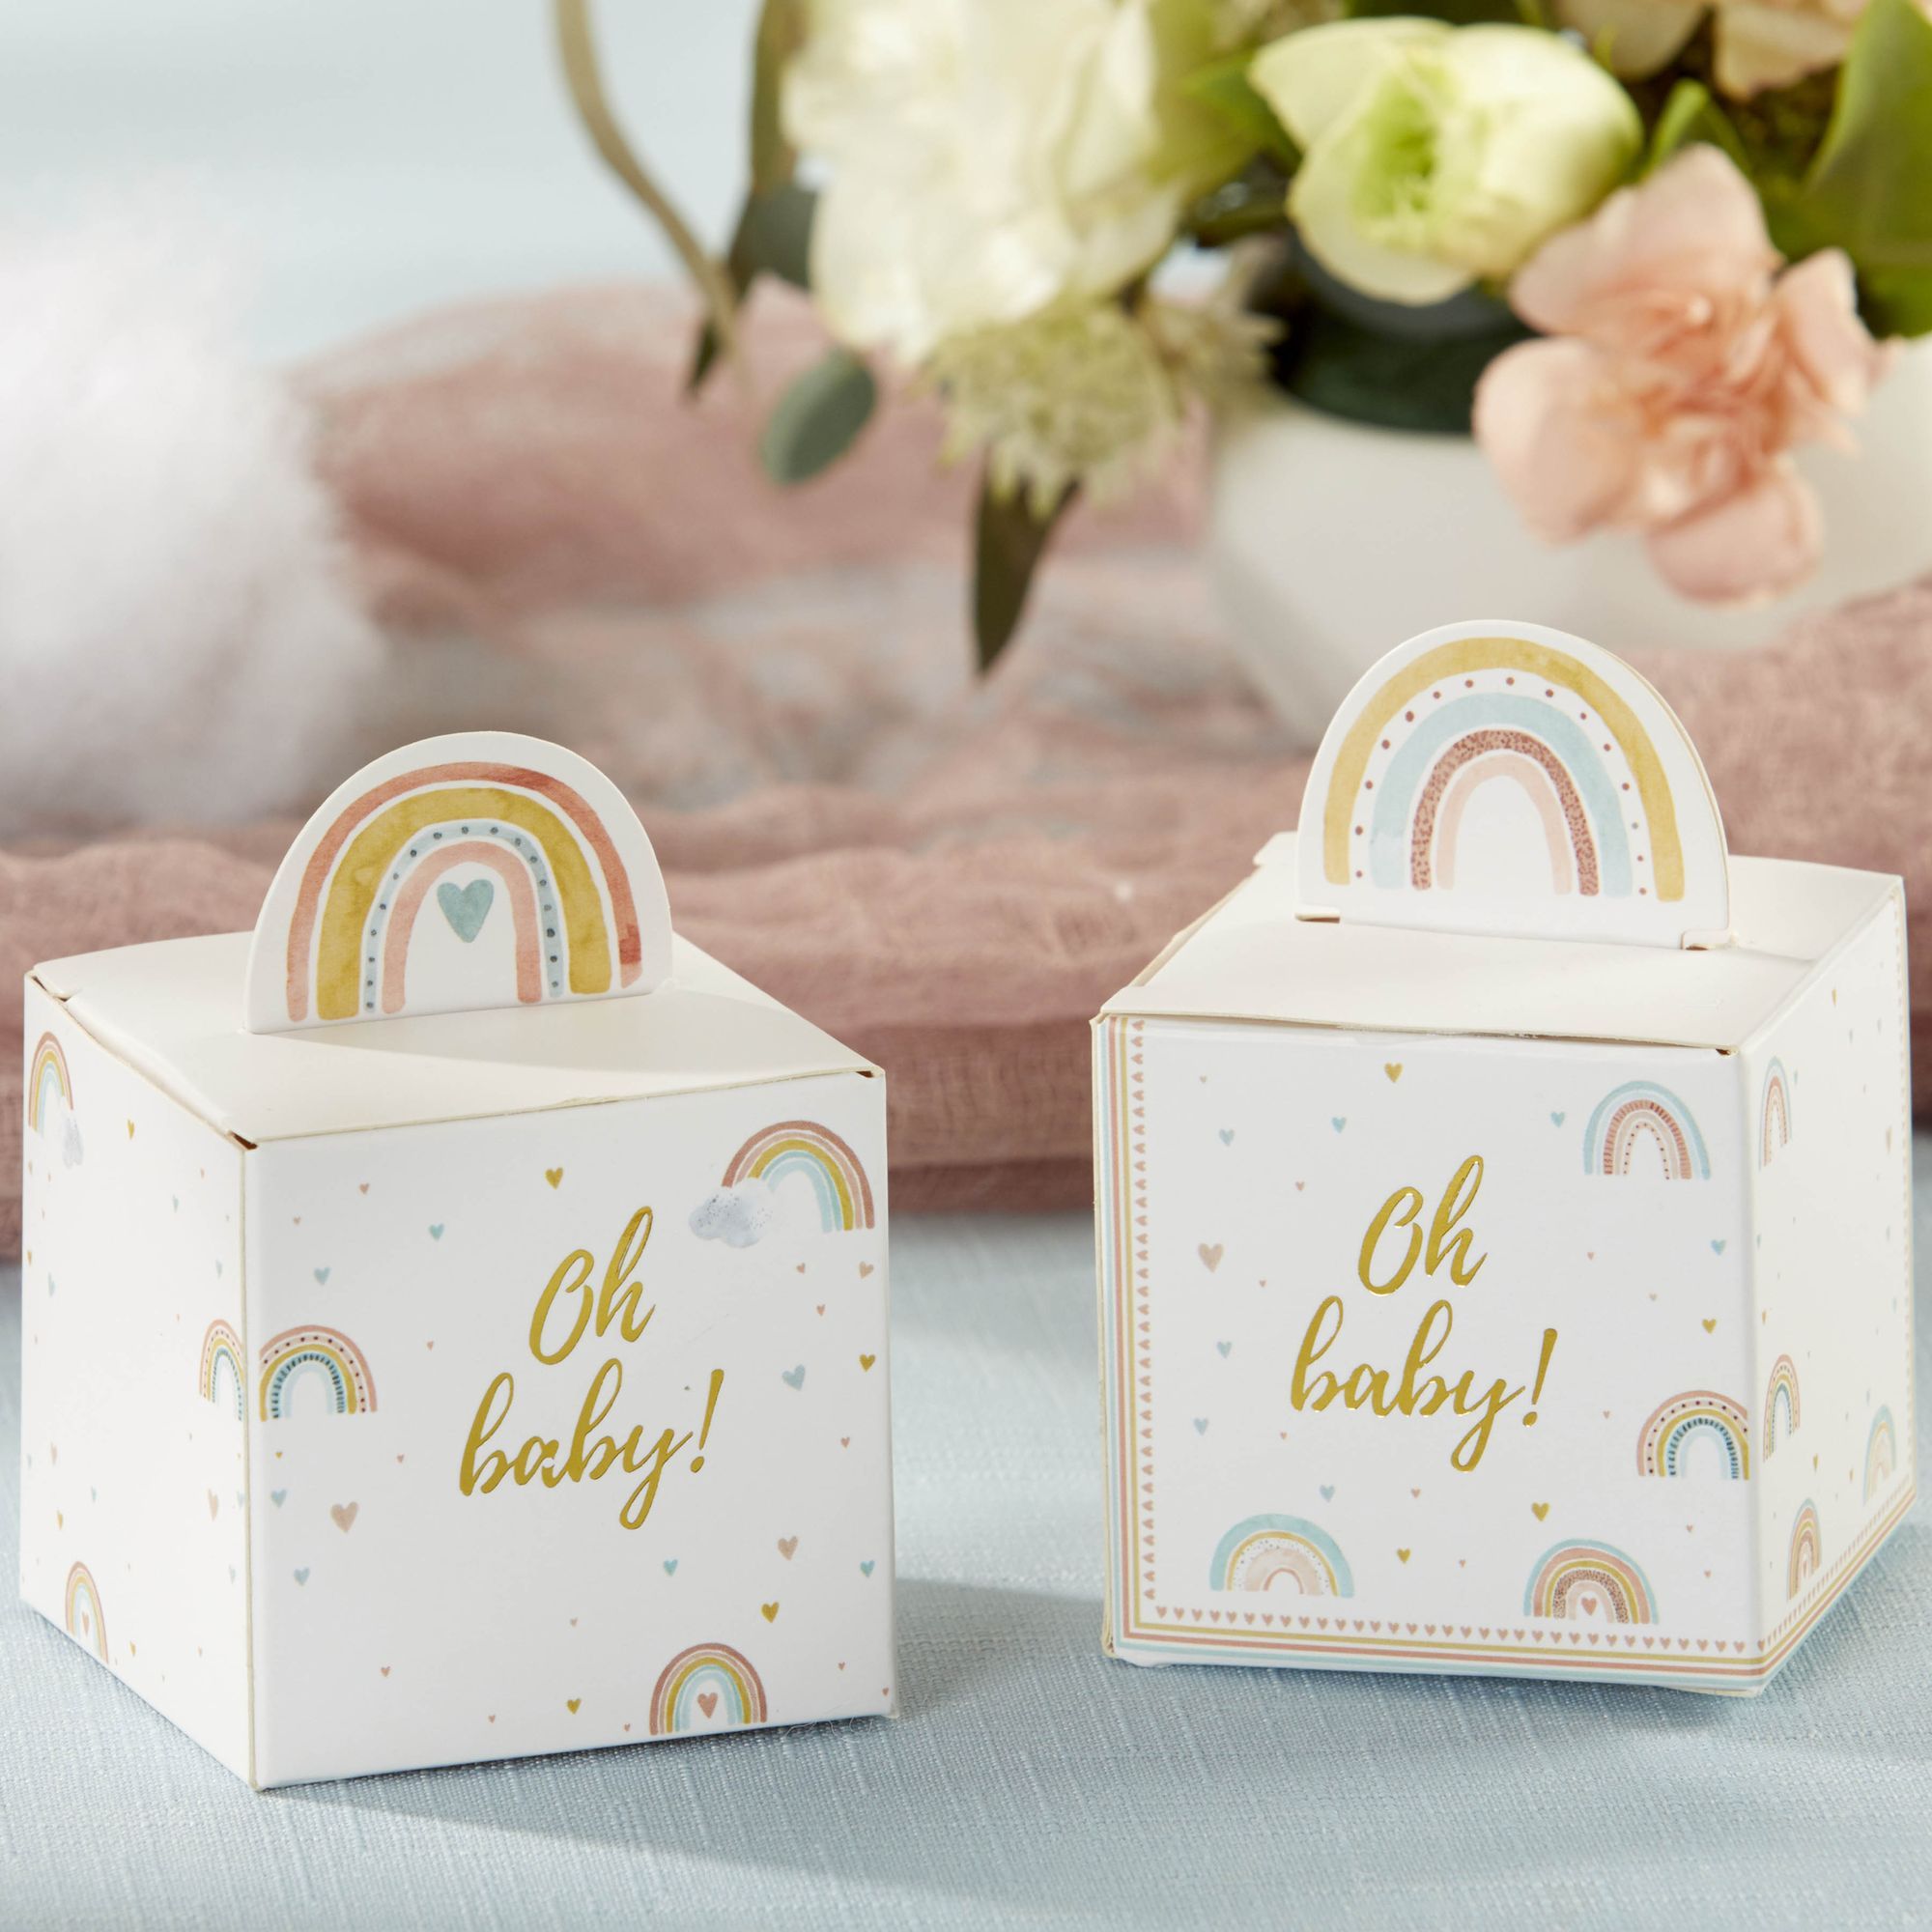 Personalized Favor Boxes | Beau-coup